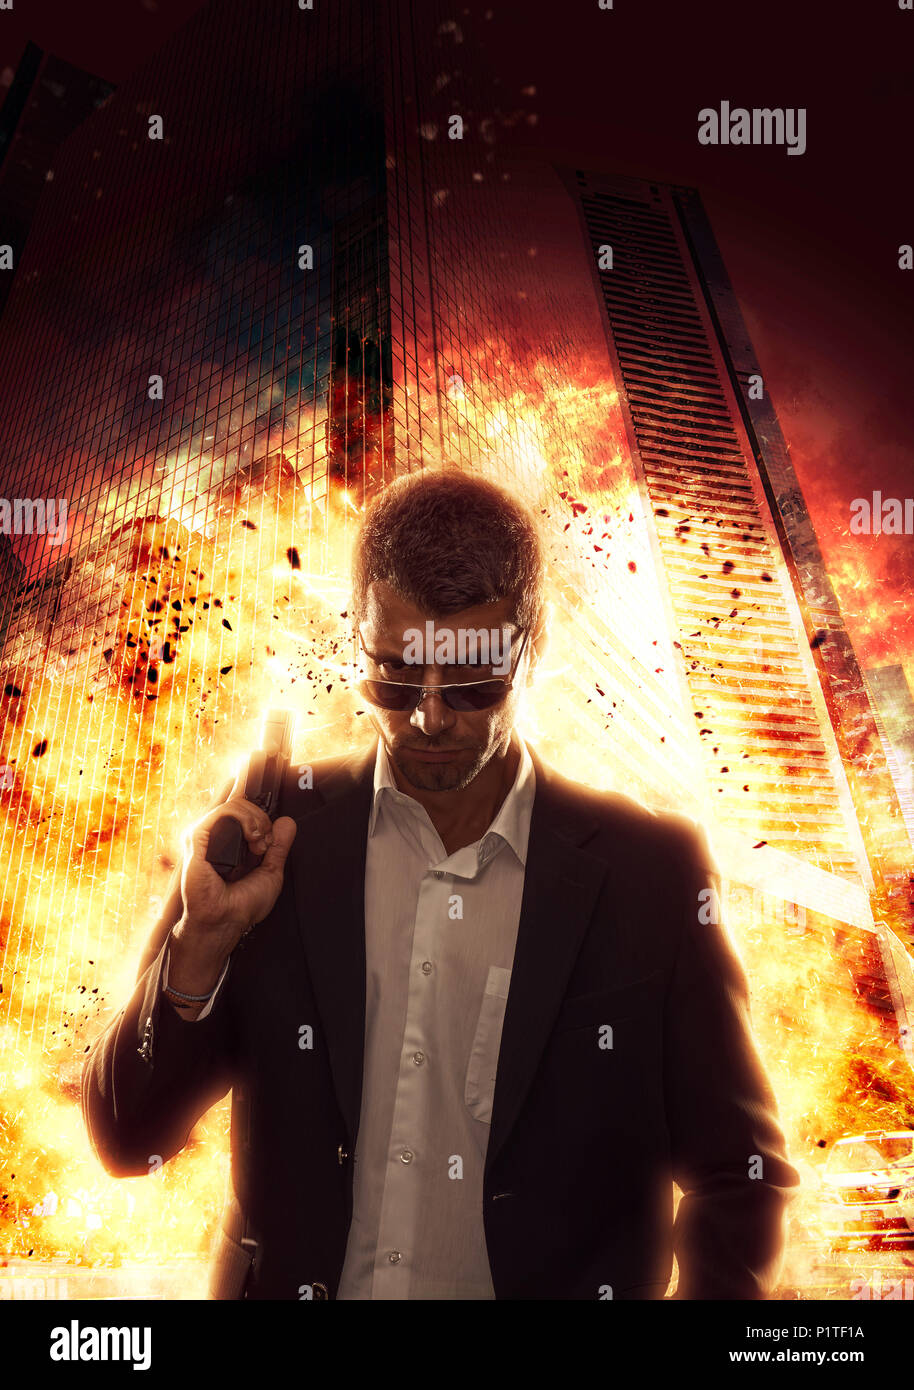 Man in suit with a gun on explosion city  background Stock Photo